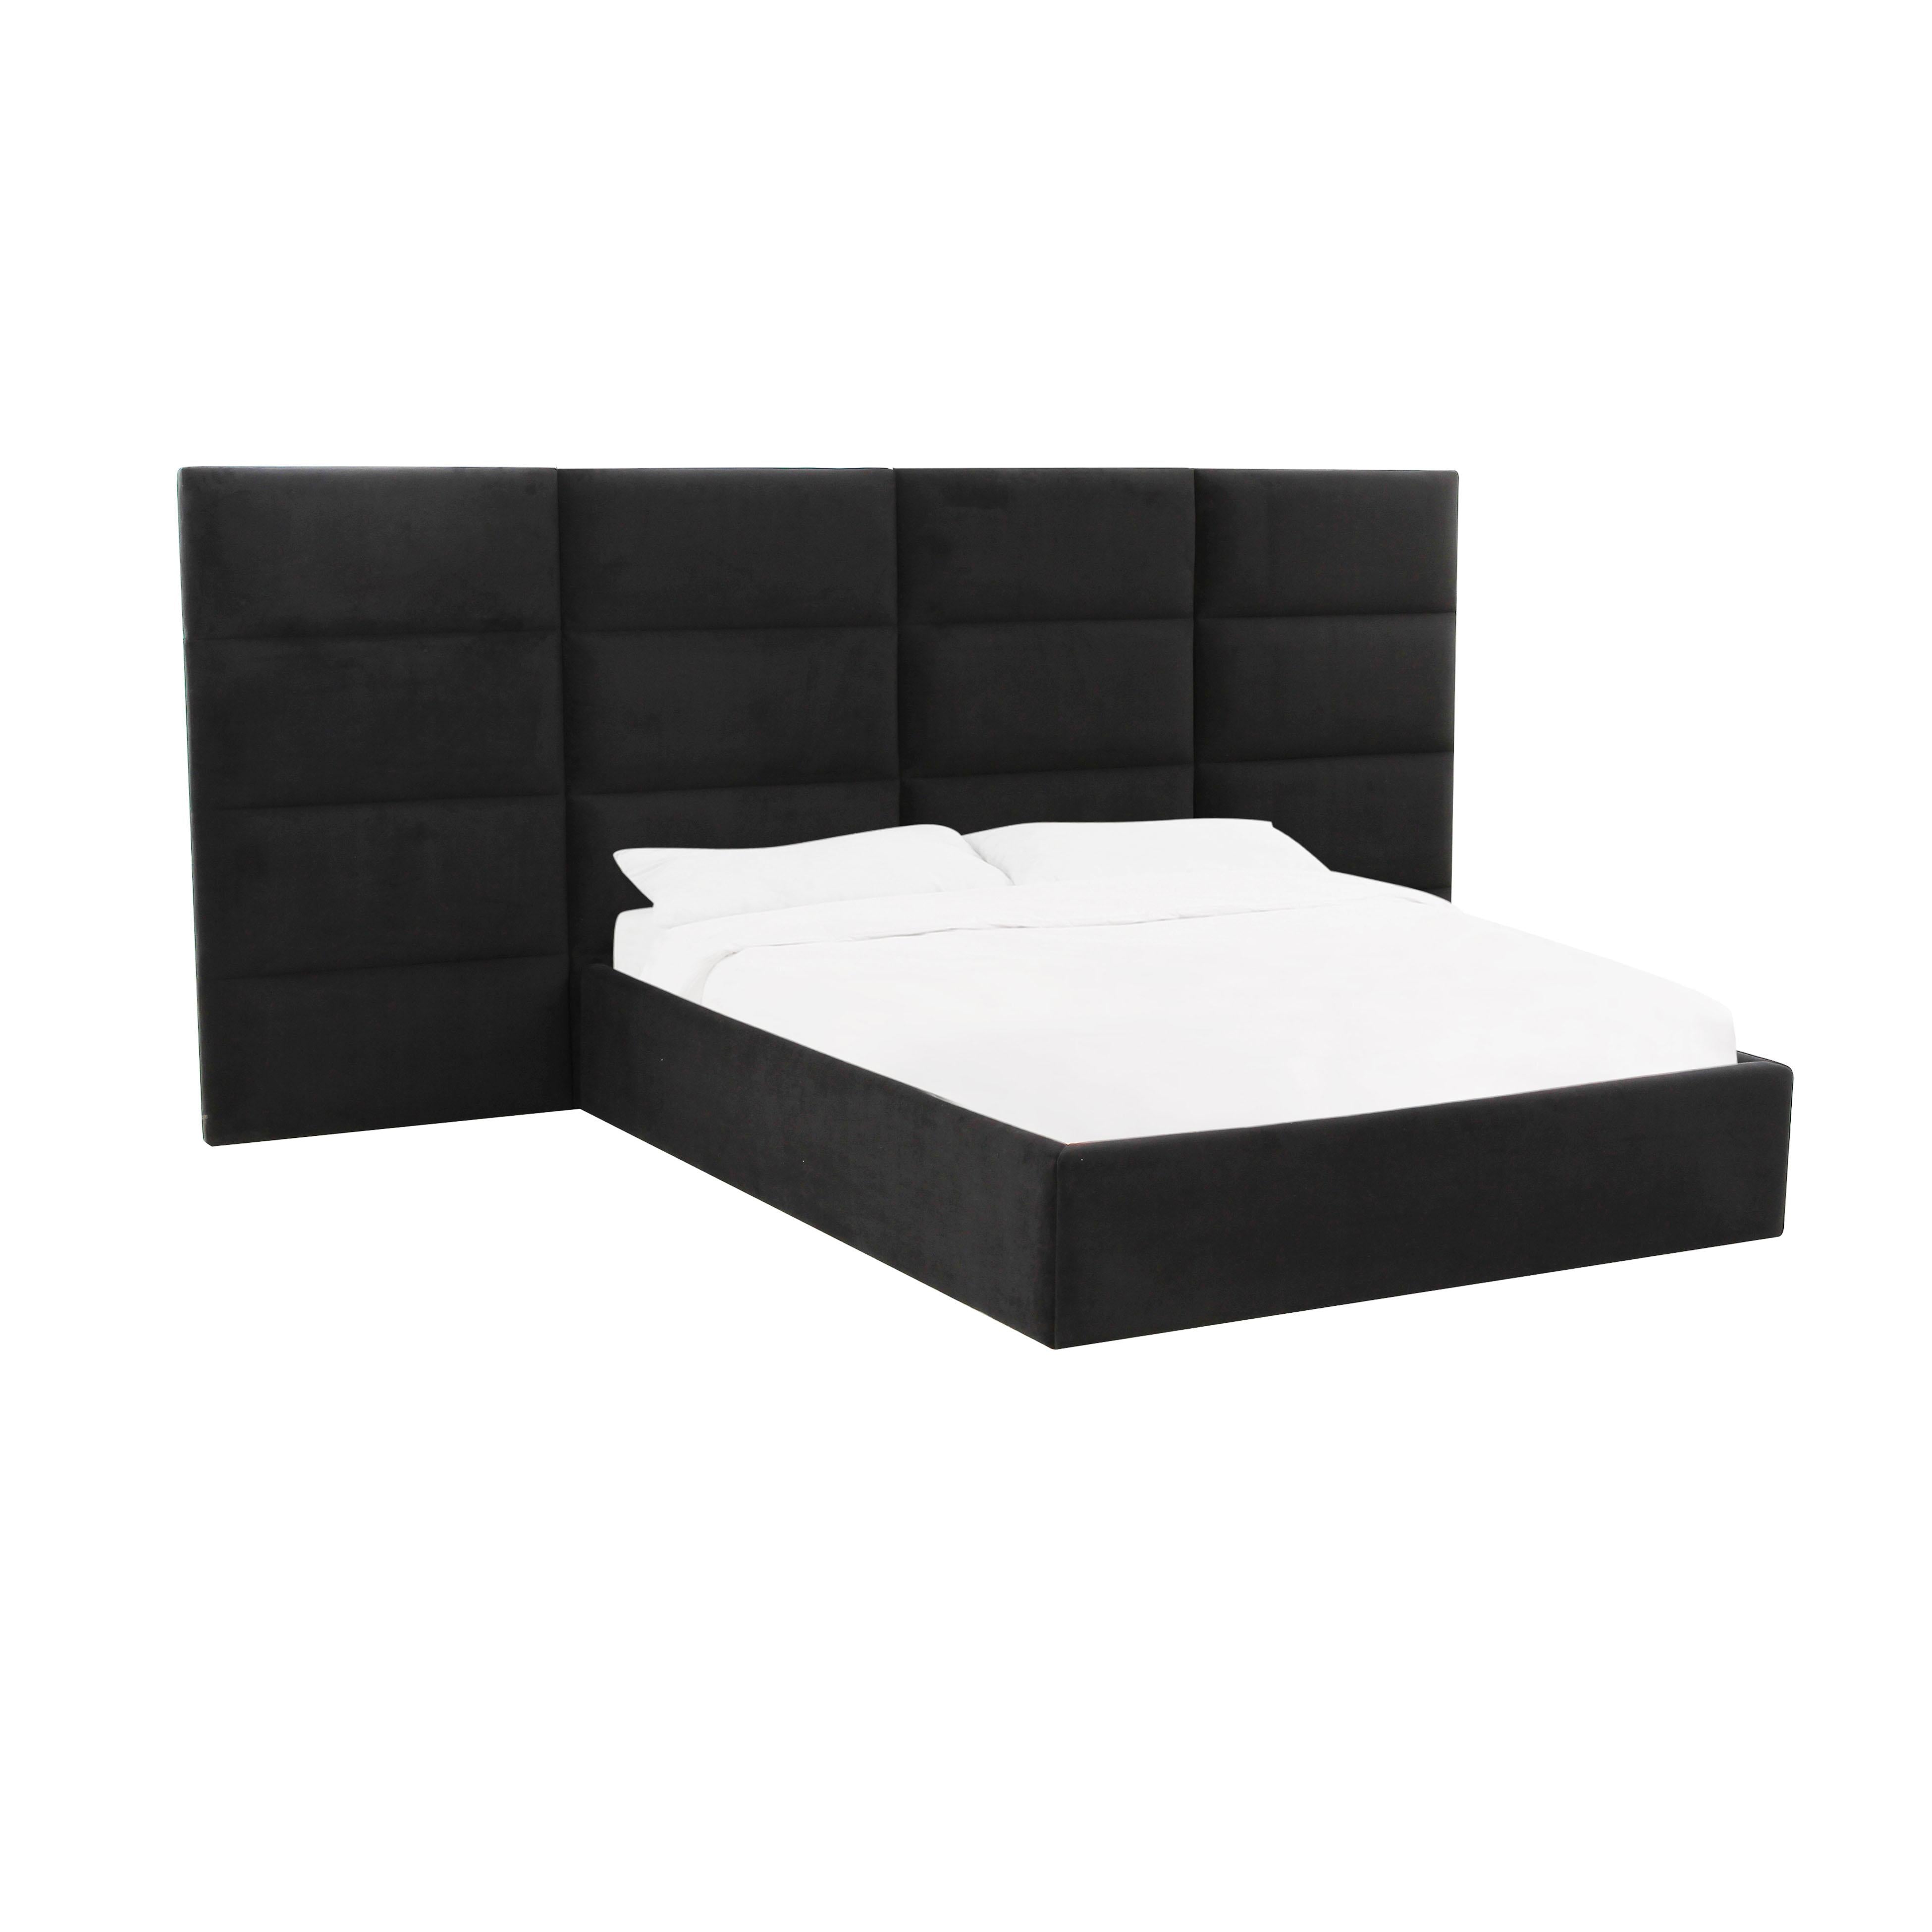 Tov Furniture Beds - Eliana Black Velvet Queen Bed with Wings